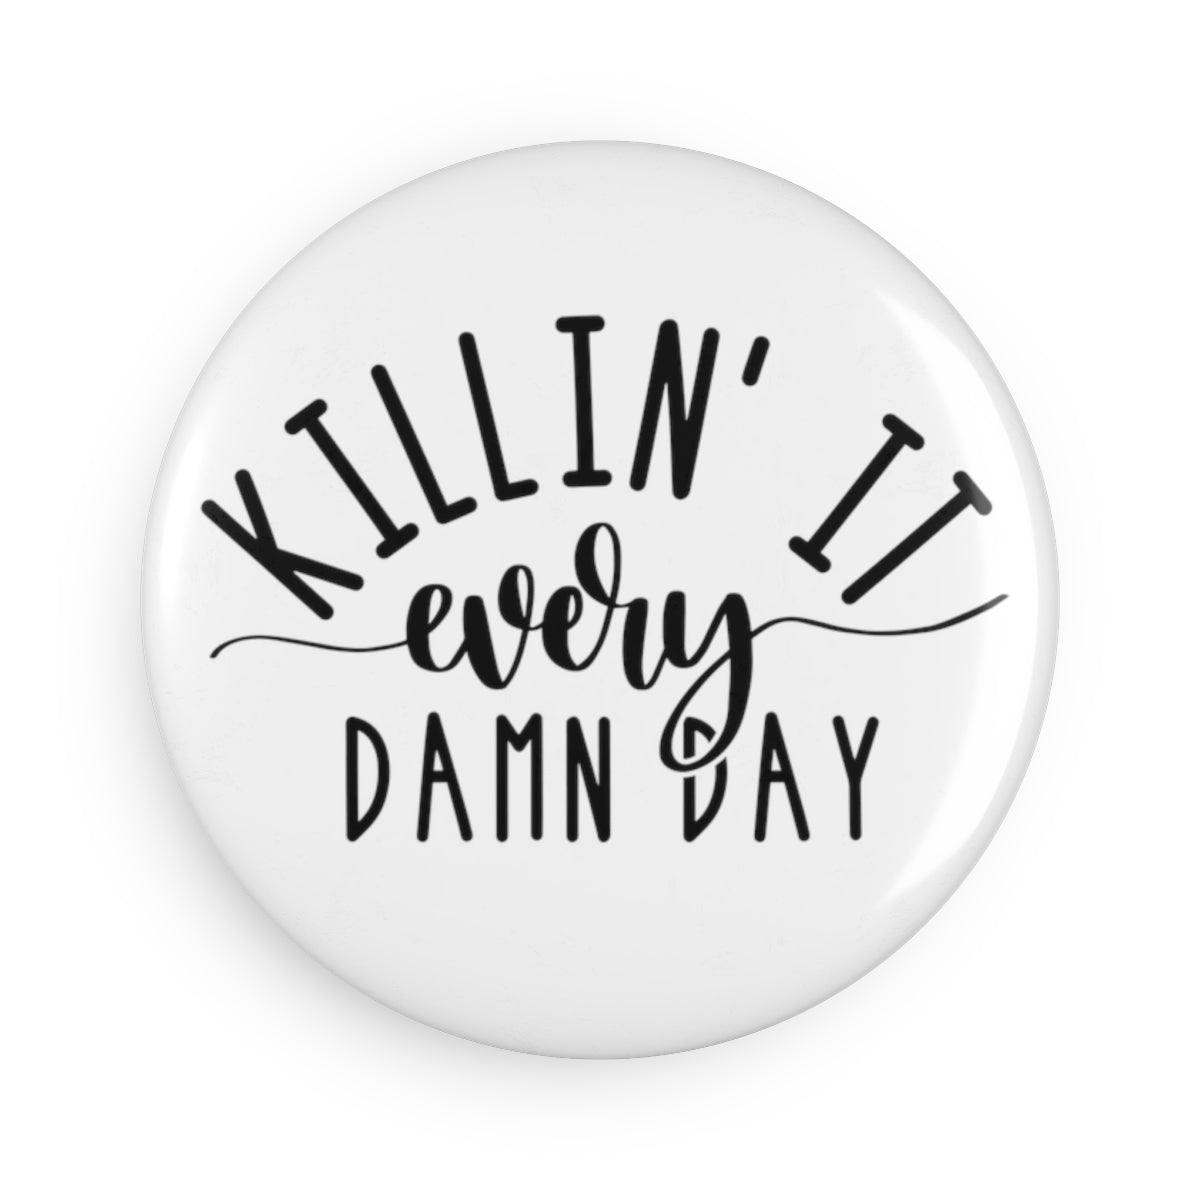 Killing it every damn day Button Magnet, Round (1 & 10 pcs)